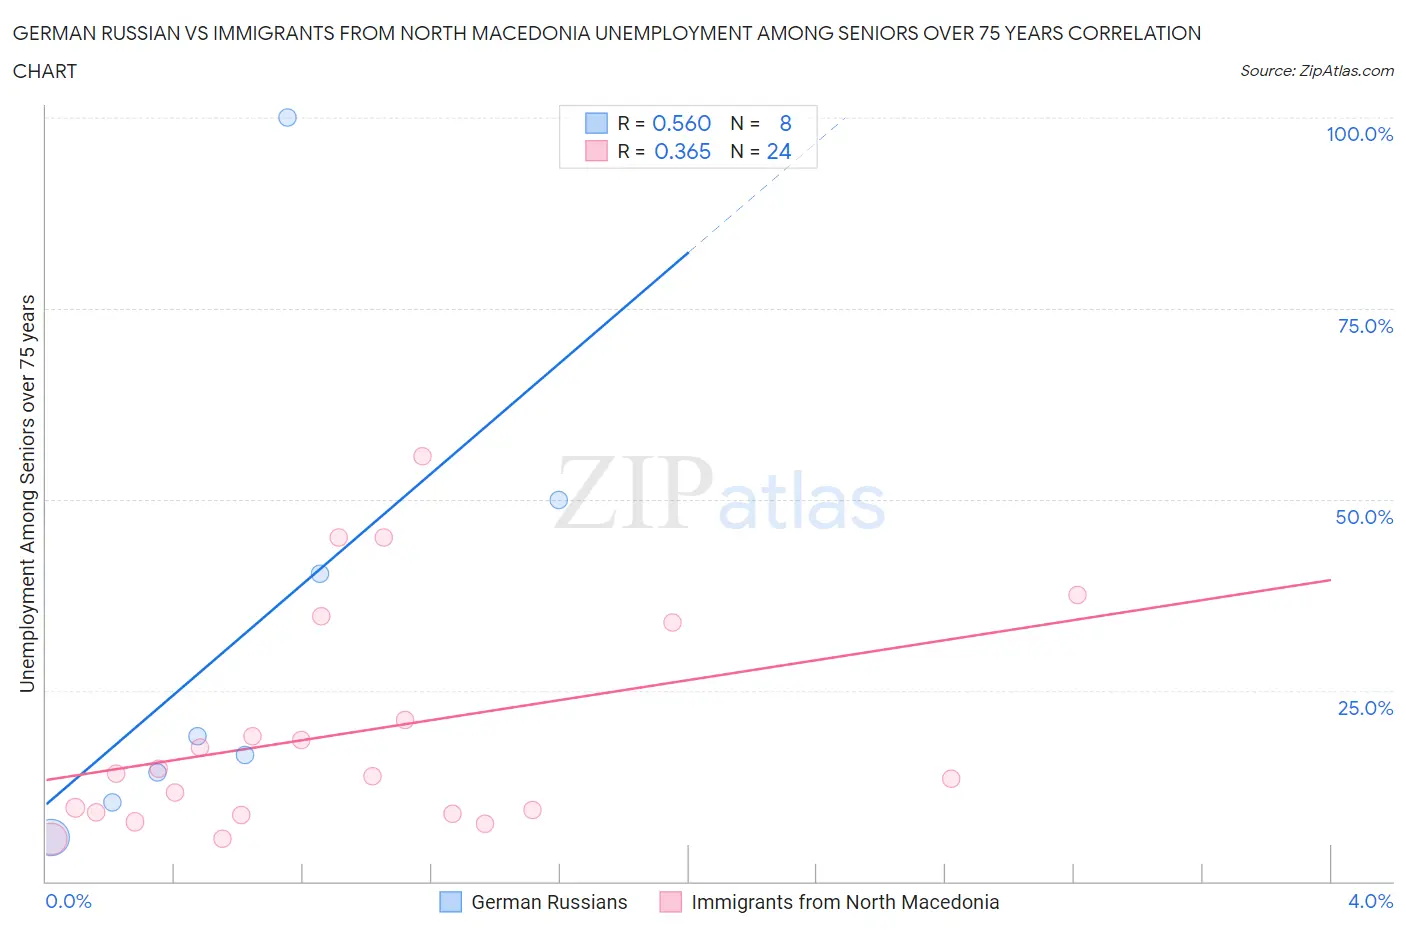 German Russian vs Immigrants from North Macedonia Unemployment Among Seniors over 75 years